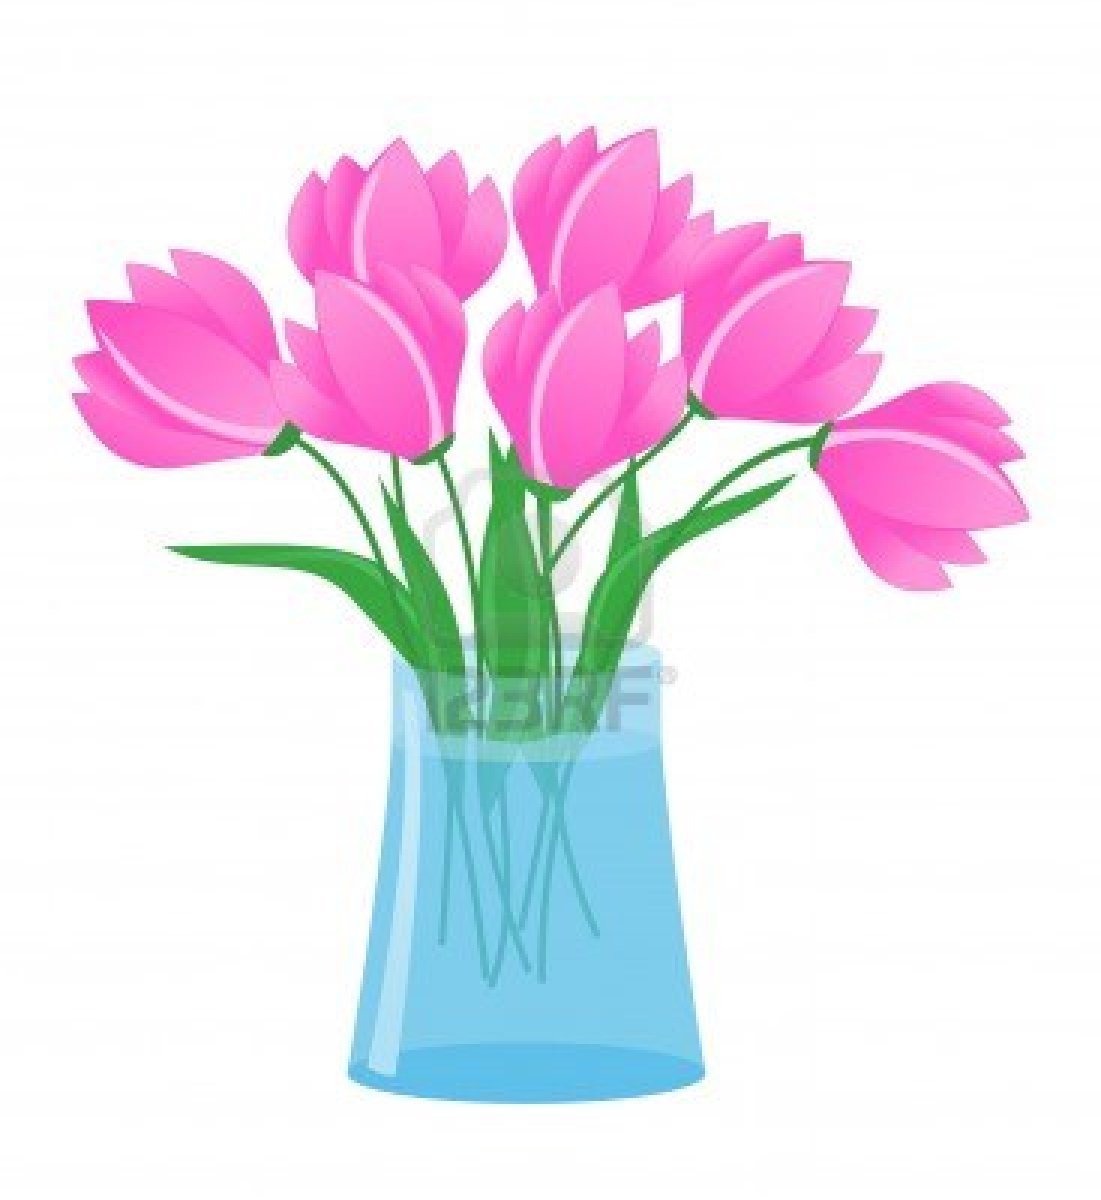 Flowers In A Vase Clipart Flowers In Vase Stock Vector